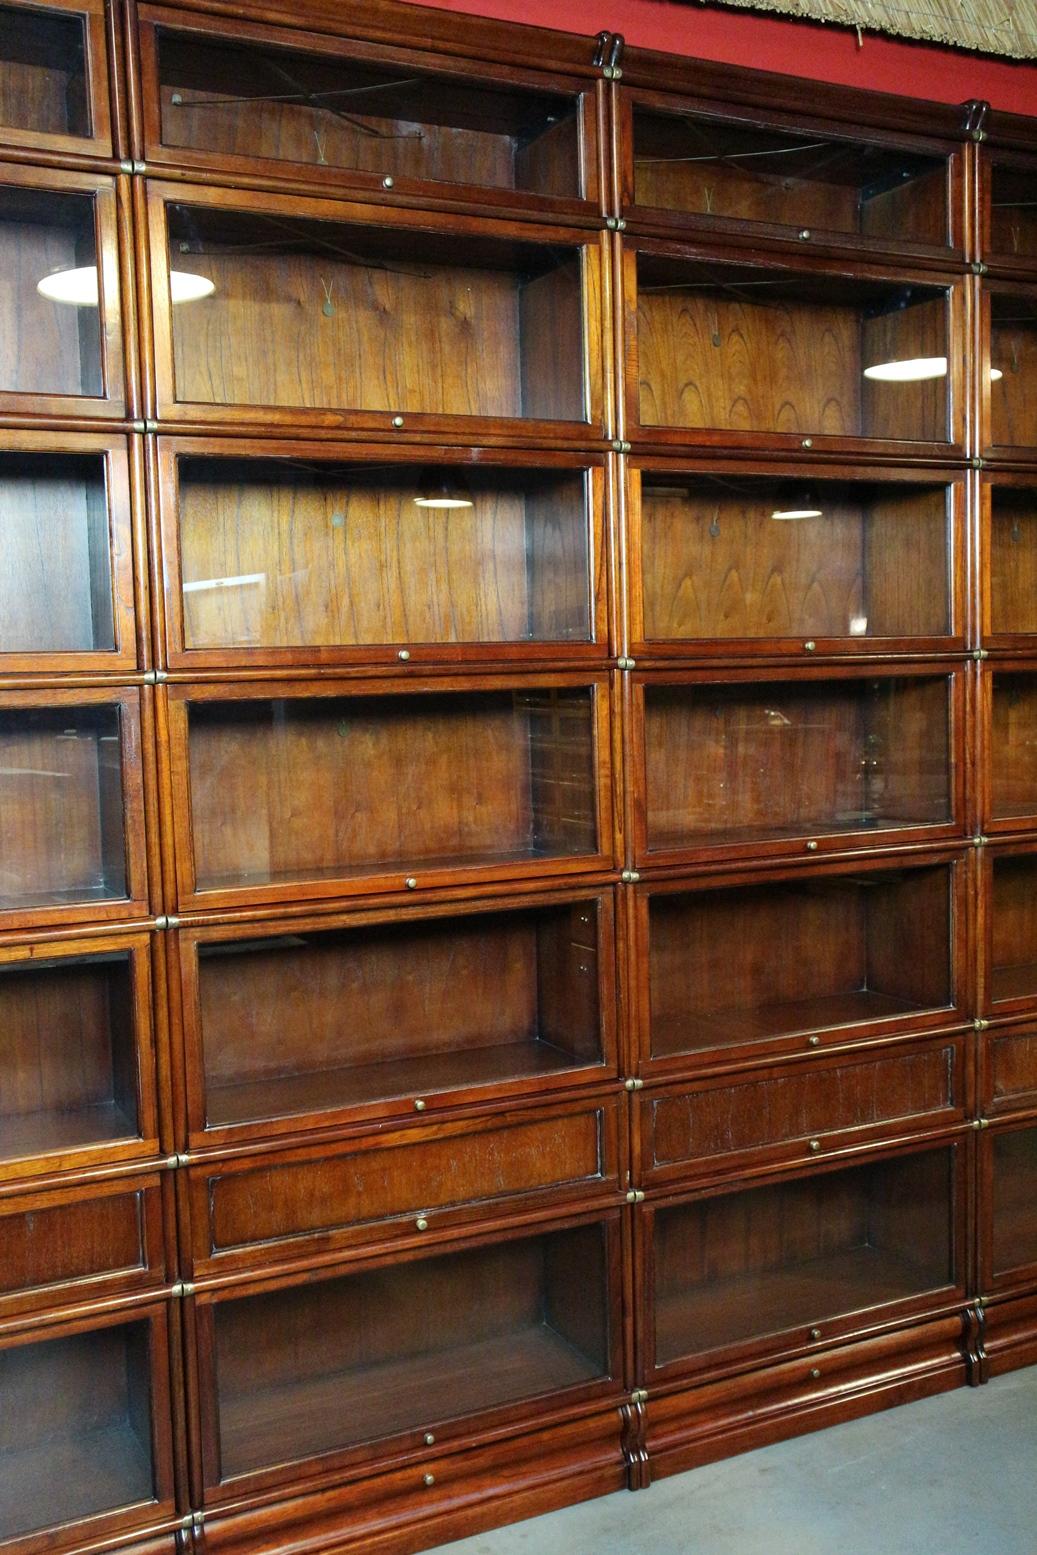 Impressive large Globe Wernicke bookcase / bookcase wall. Completely in perfect condition. Consisting of 54 stackable parts incl. Caps and feet. Suitable for binders. 30 file parts, 12 drawers and 6 book elements.
It is not an antique Globe